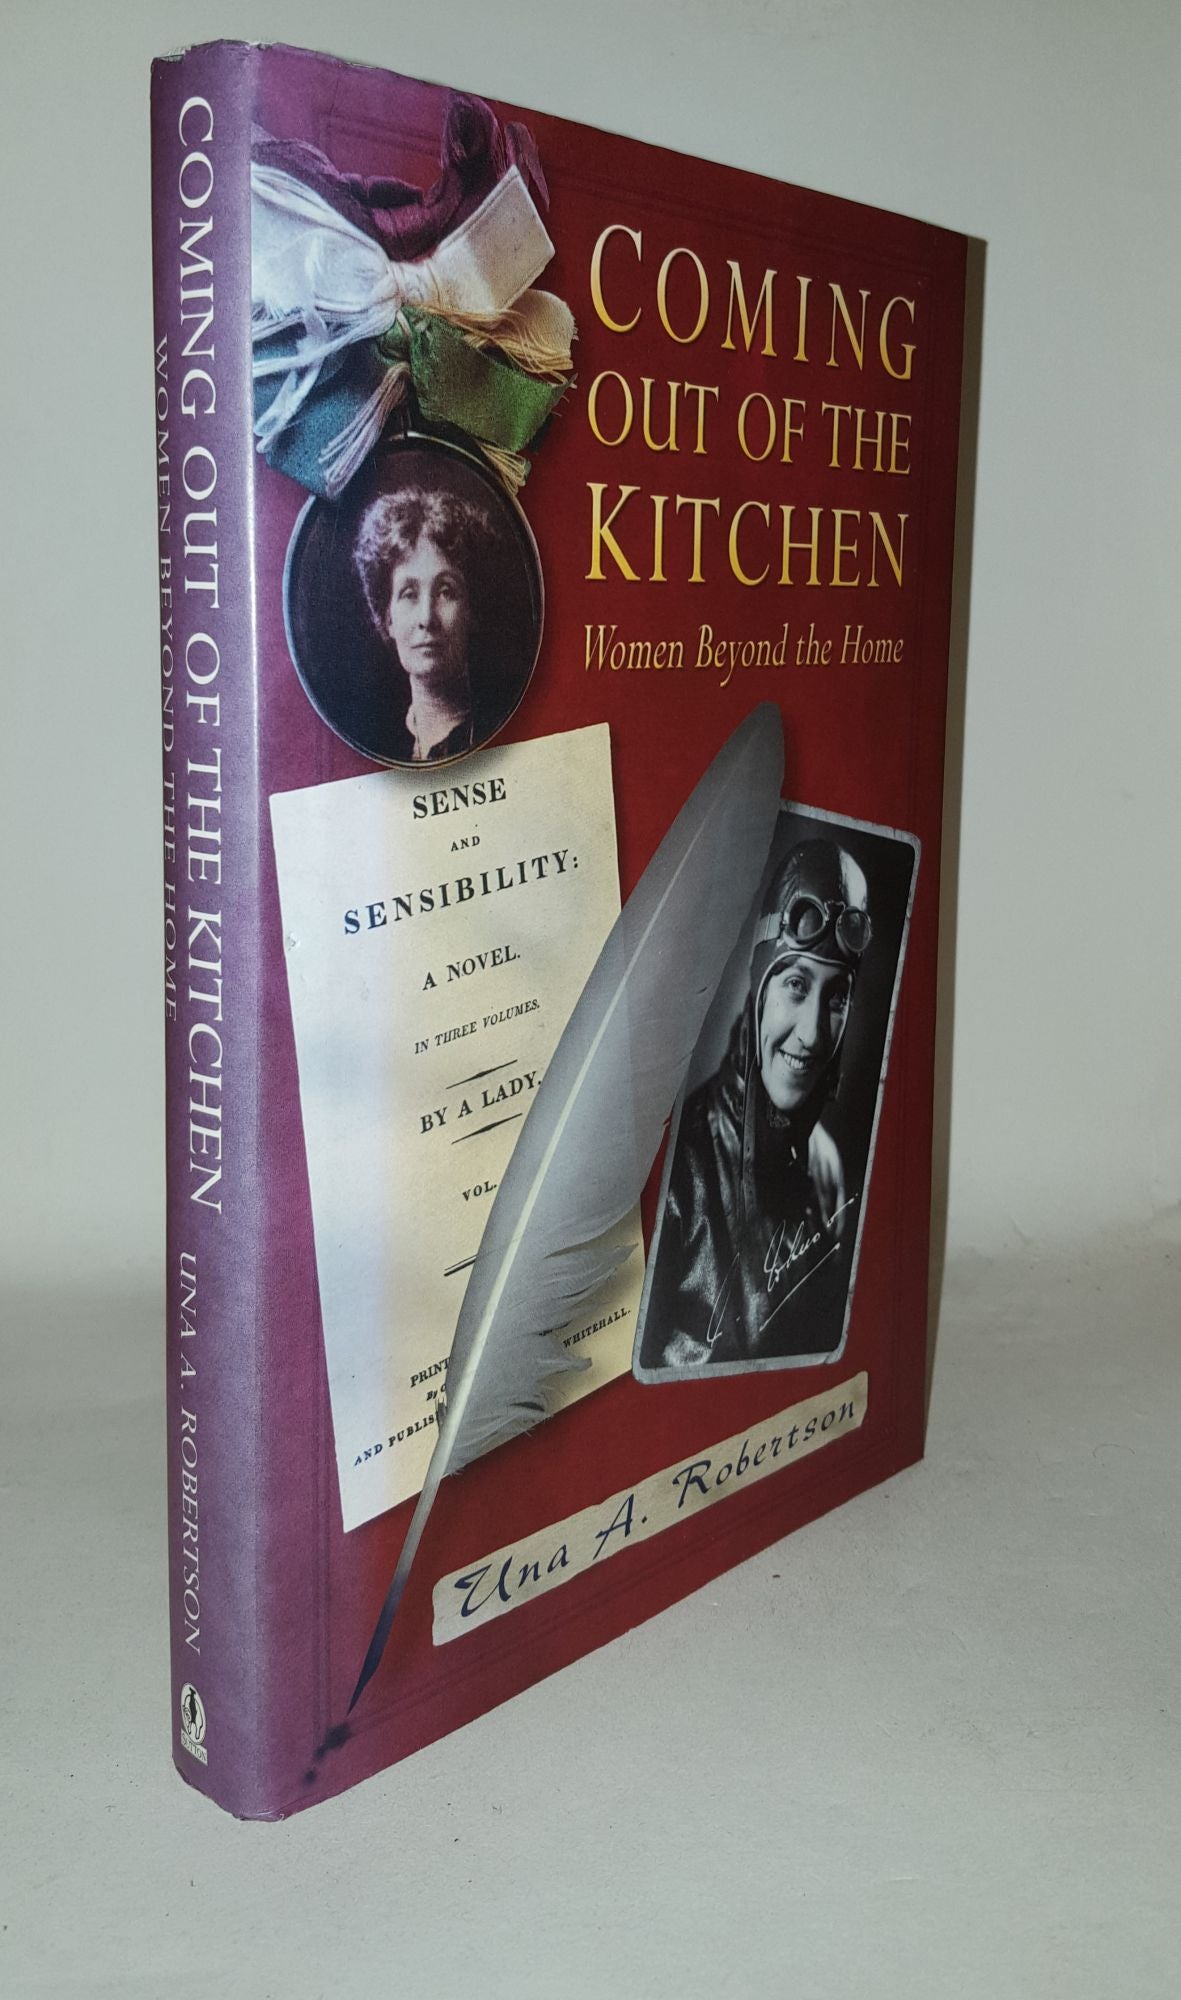 ROBERTSON Una A. - Coming out of the Kitchen Women Beyond the Home